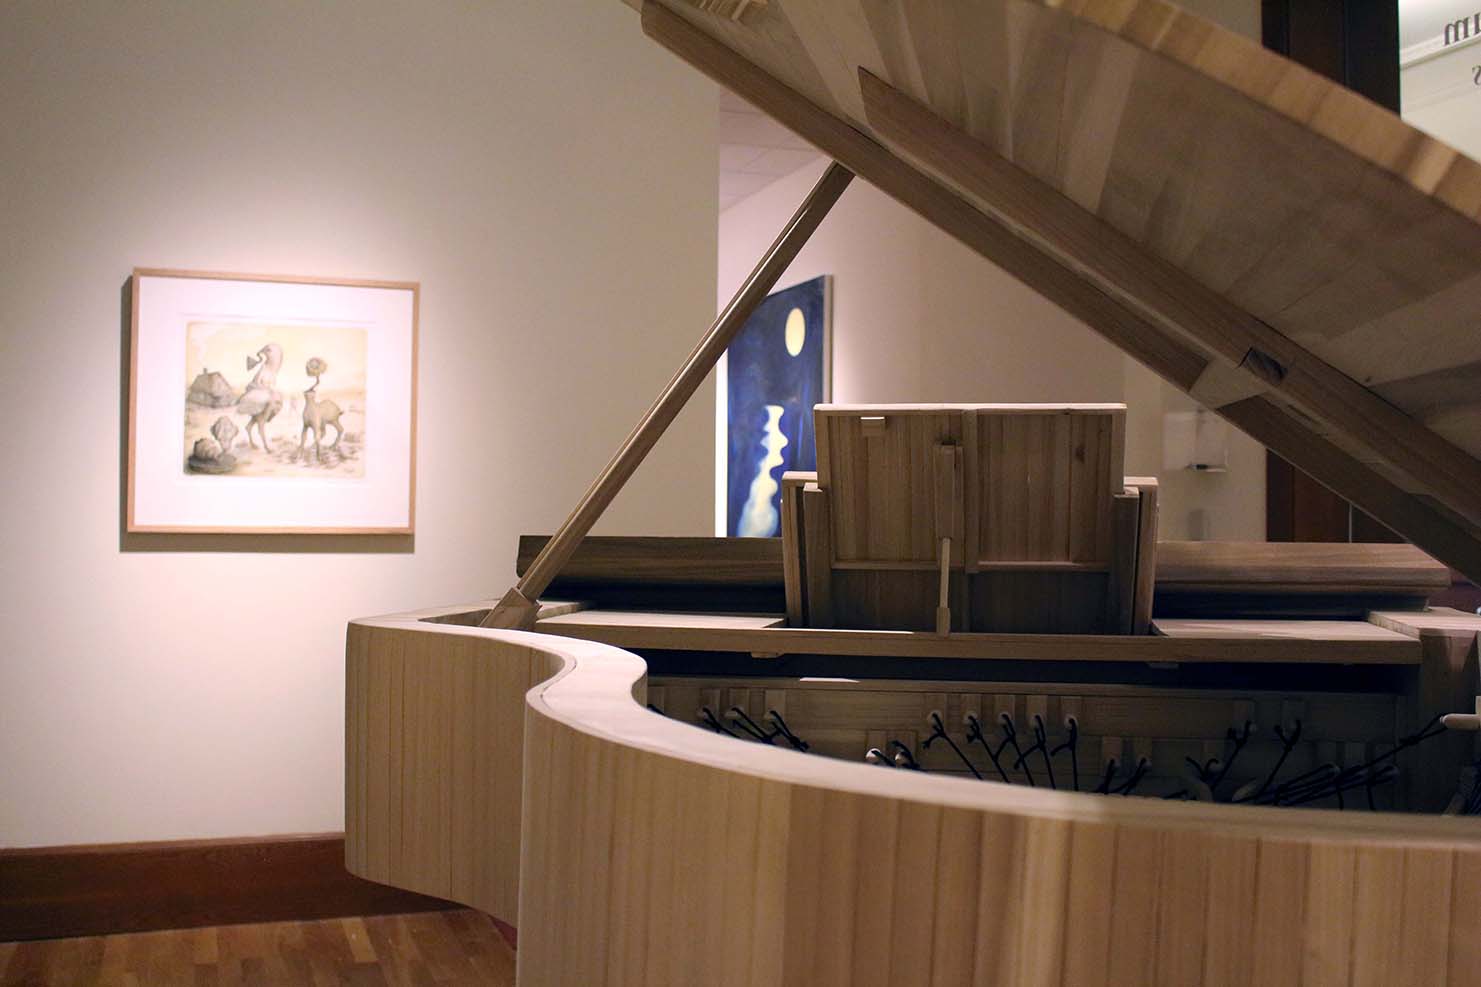 Installation image of grand constructed wood piano sculpture and lithographic print in background.